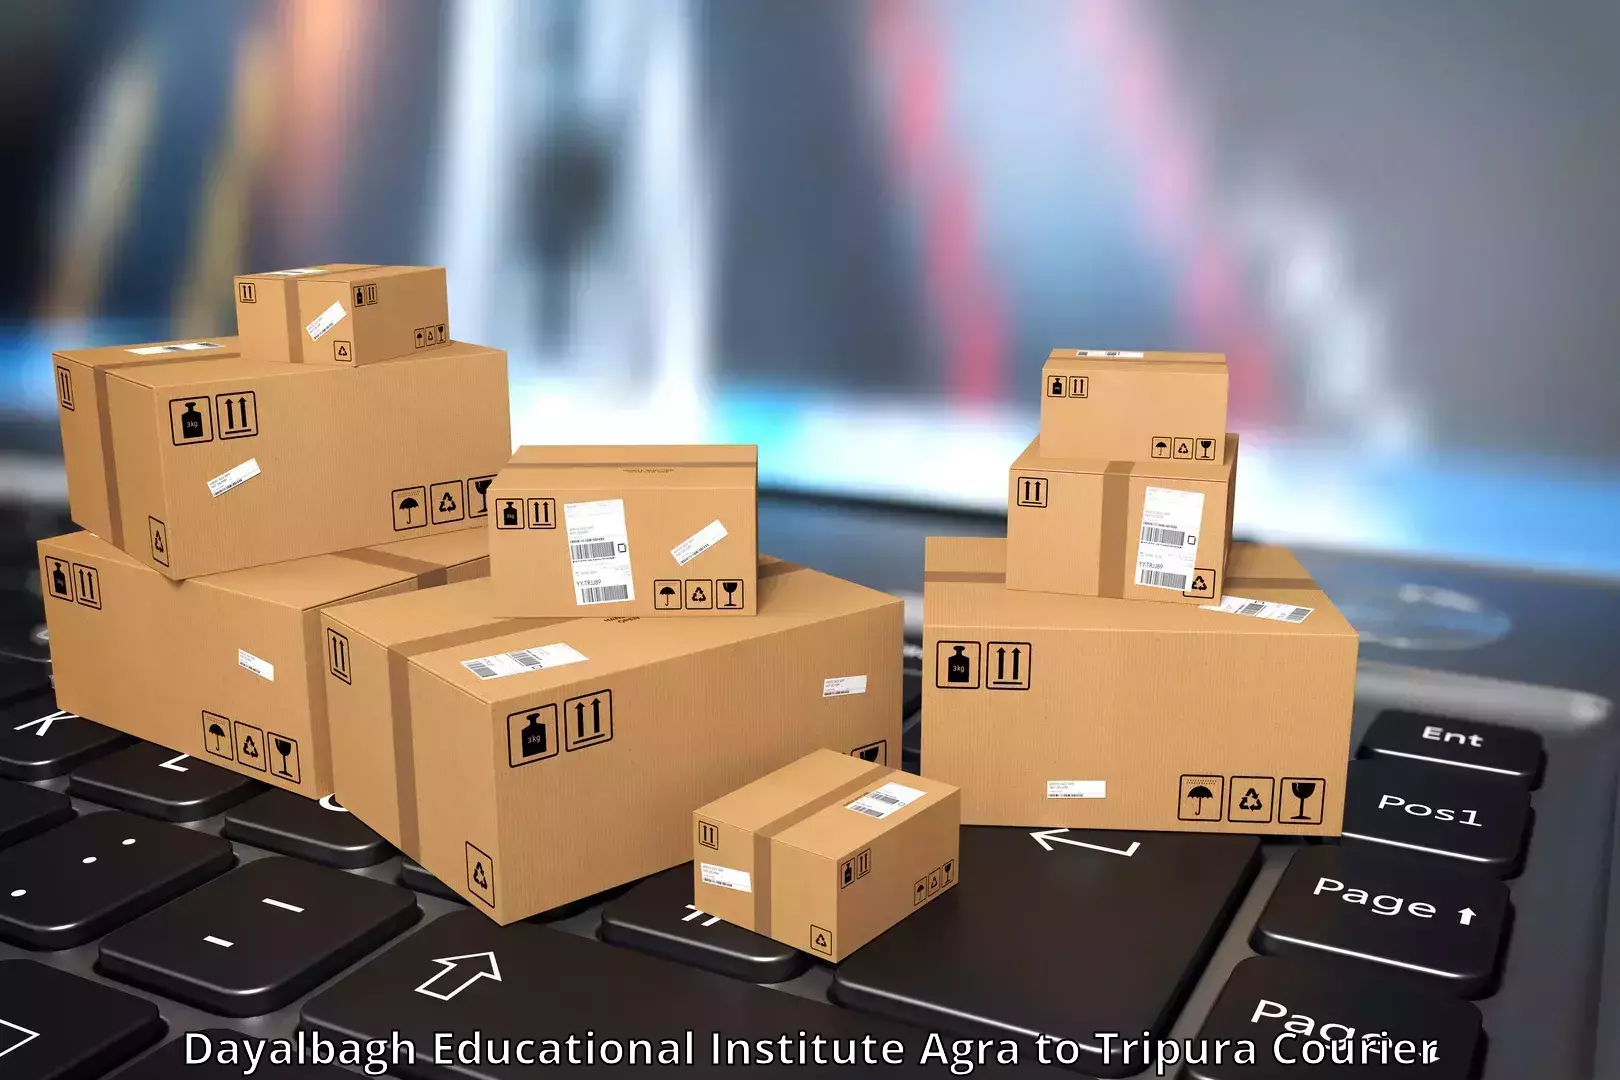 Affordable parcel service Dayalbagh Educational Institute Agra to Radhakishorepur